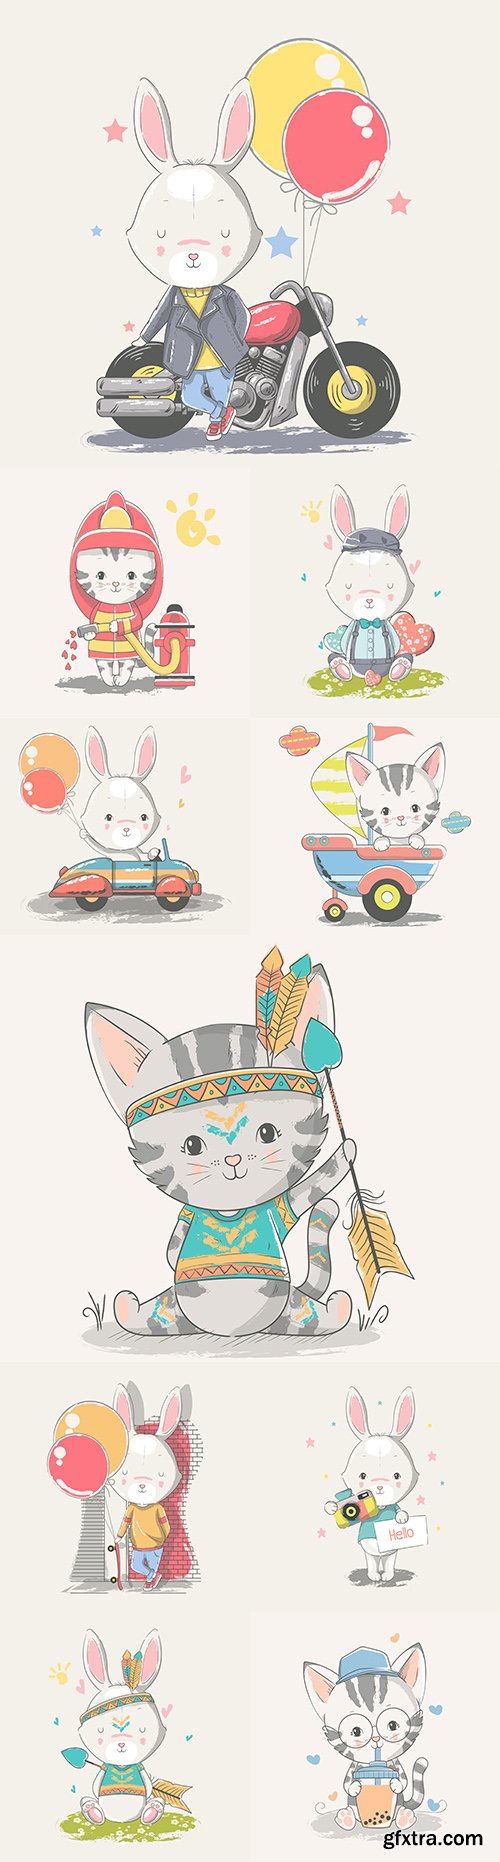 Cute baby rabbit and kitten painted illustrations